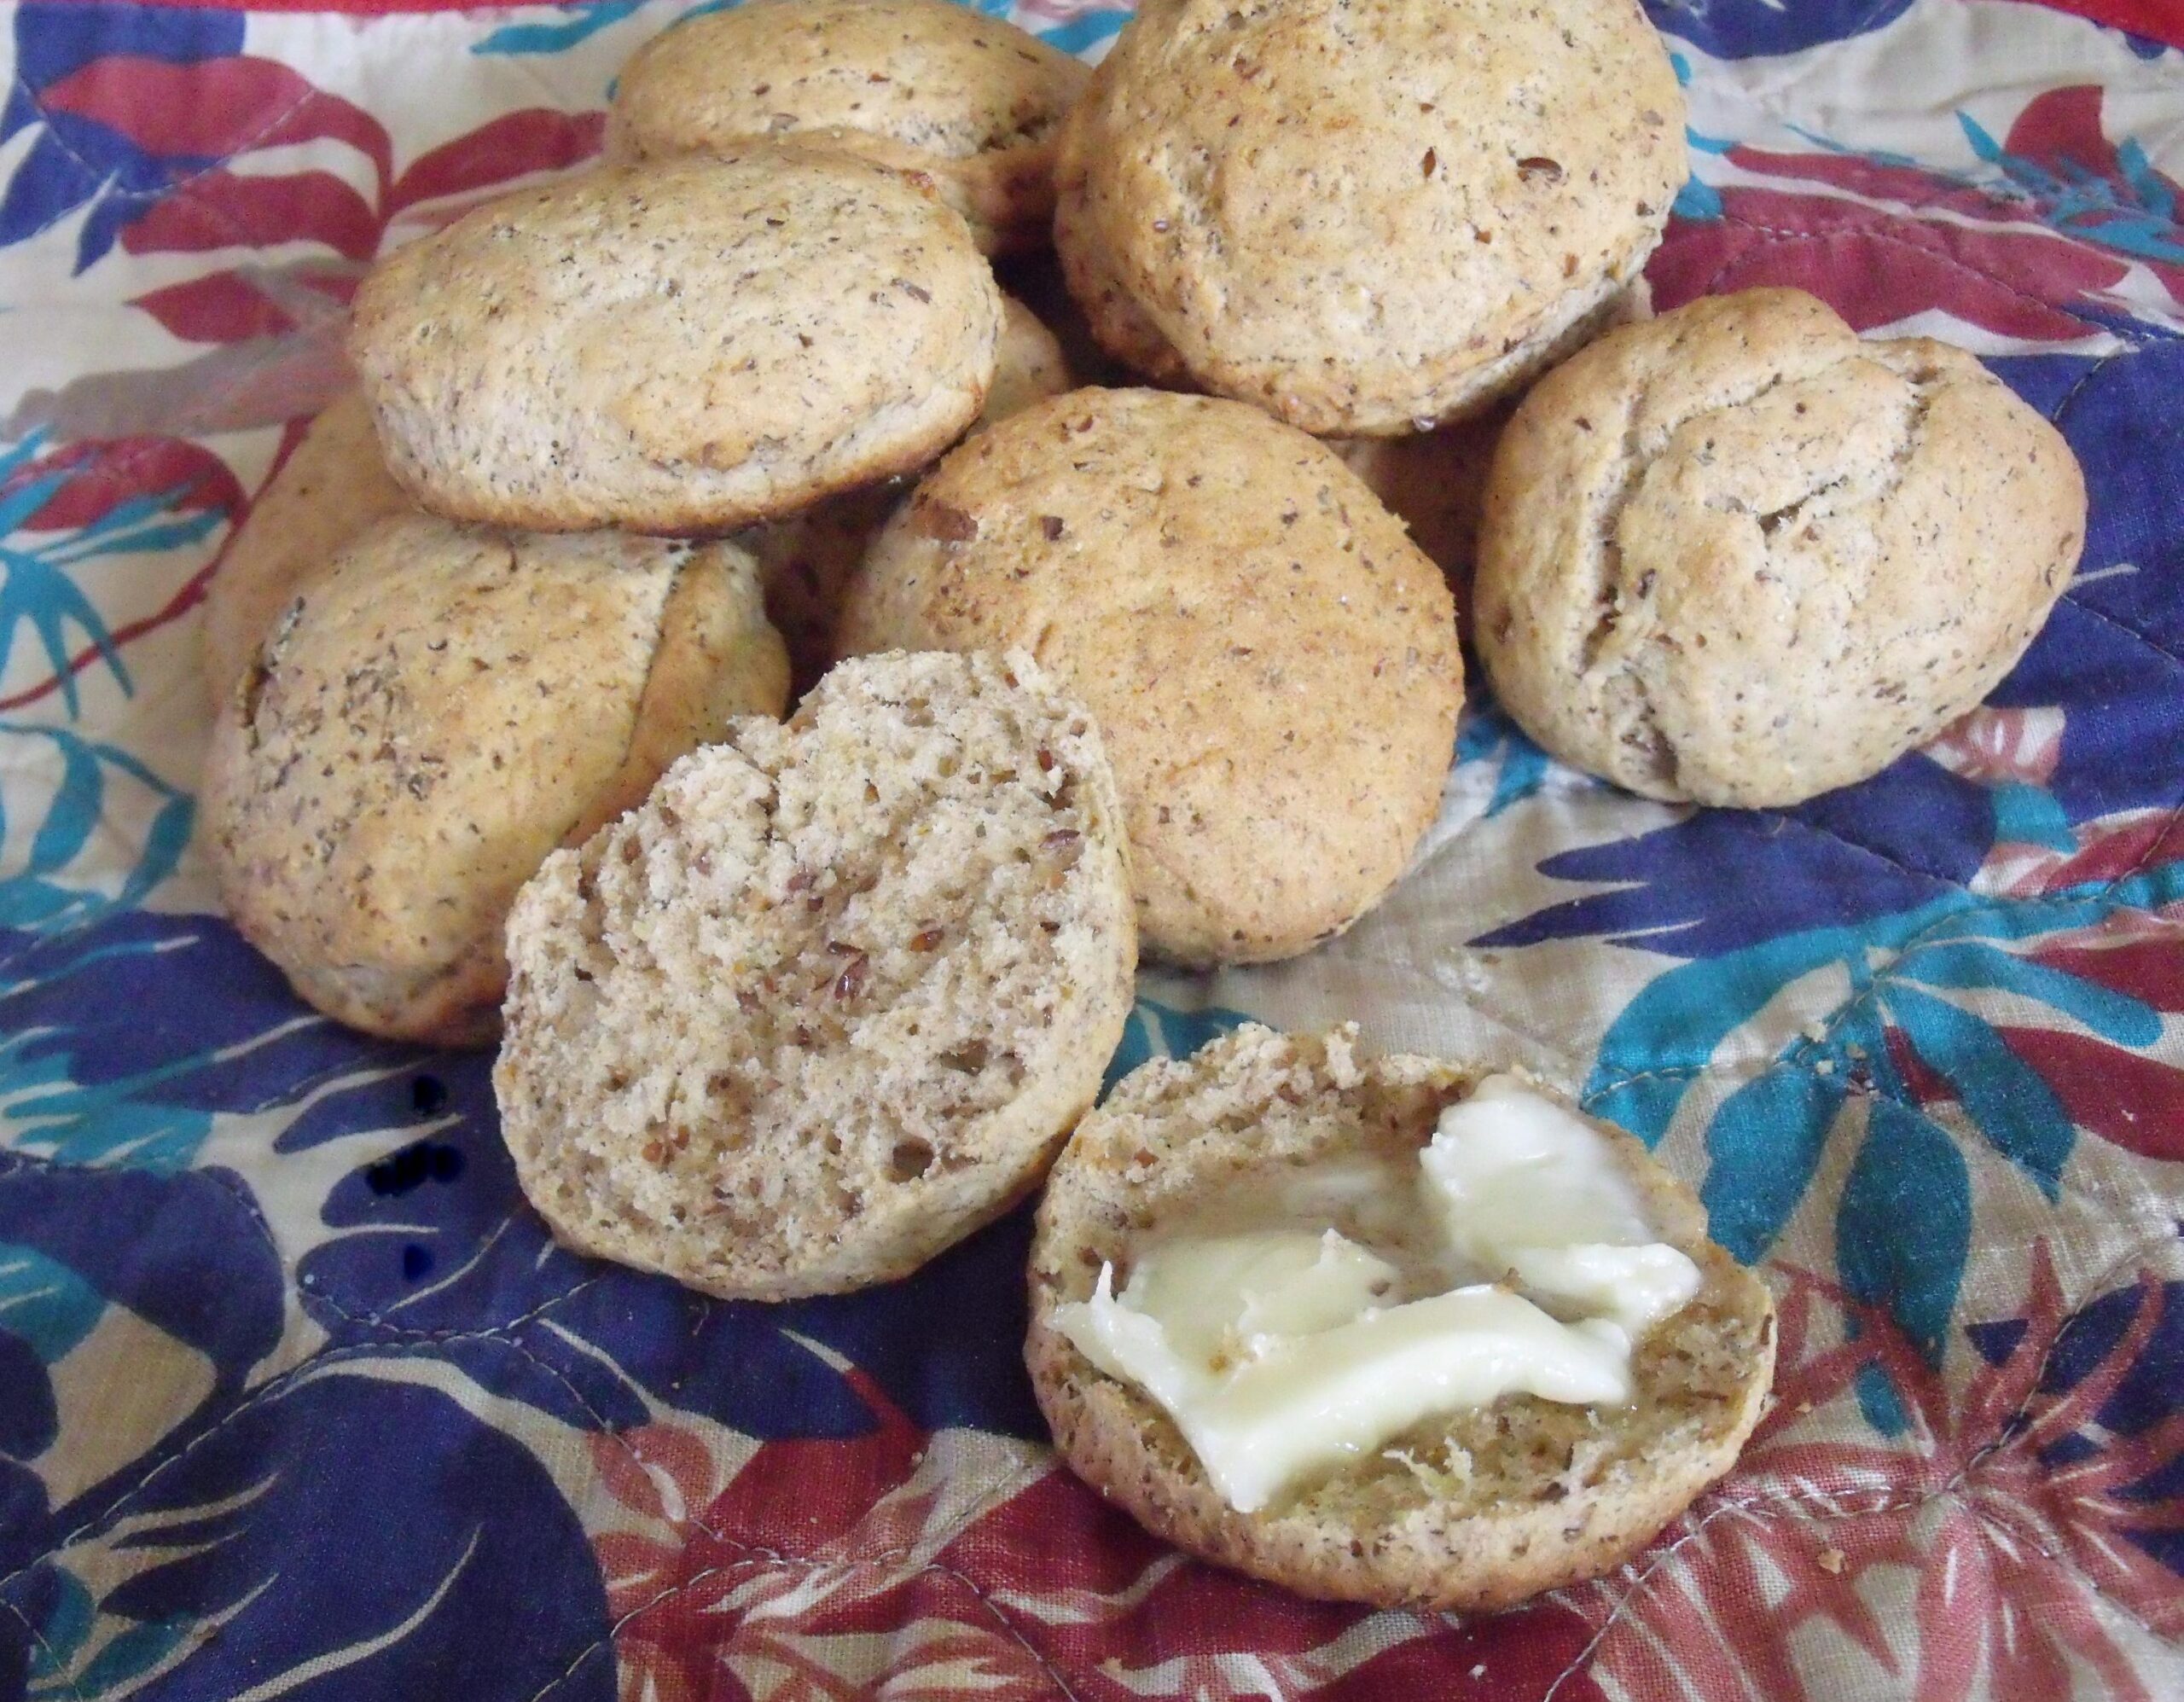 Banana-Coffee Biscuits